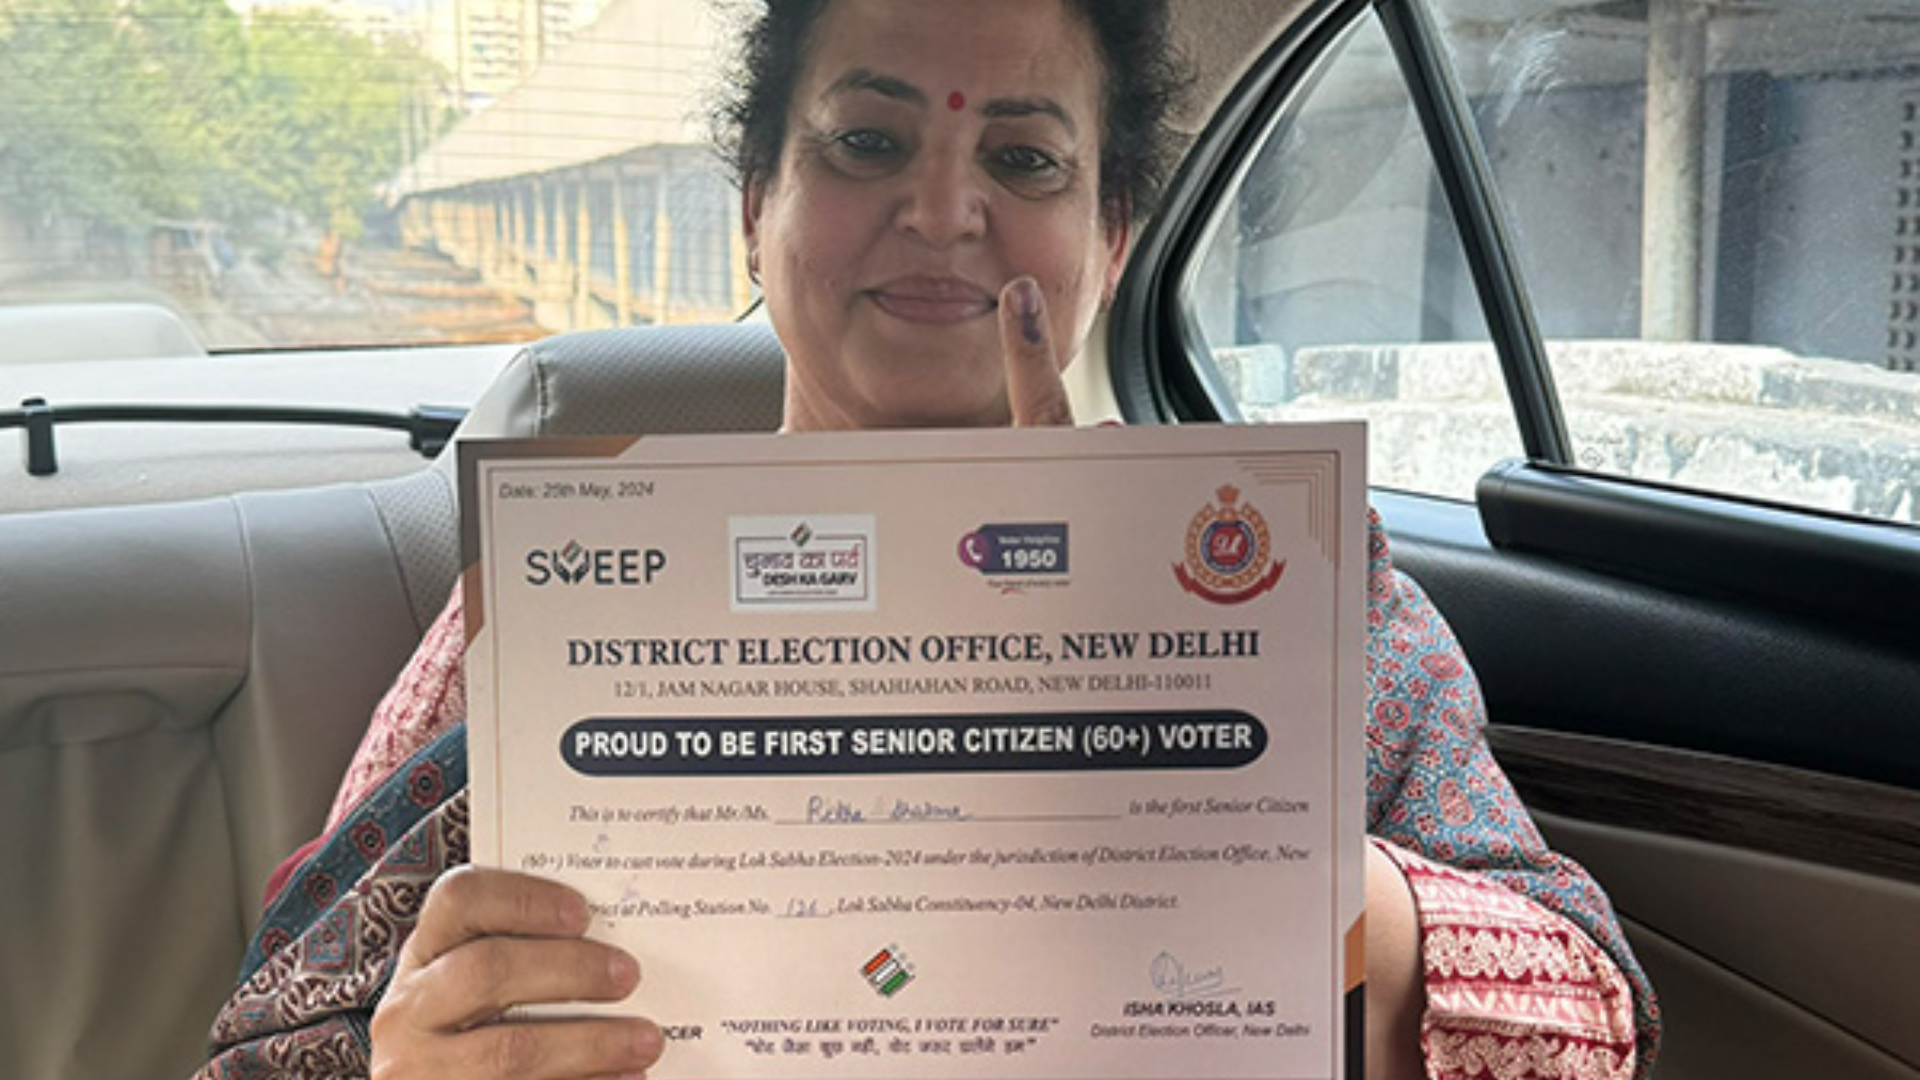 NCW Chief Rekha Sharma Proudly Casts First Senior Citizen Vote in Booth